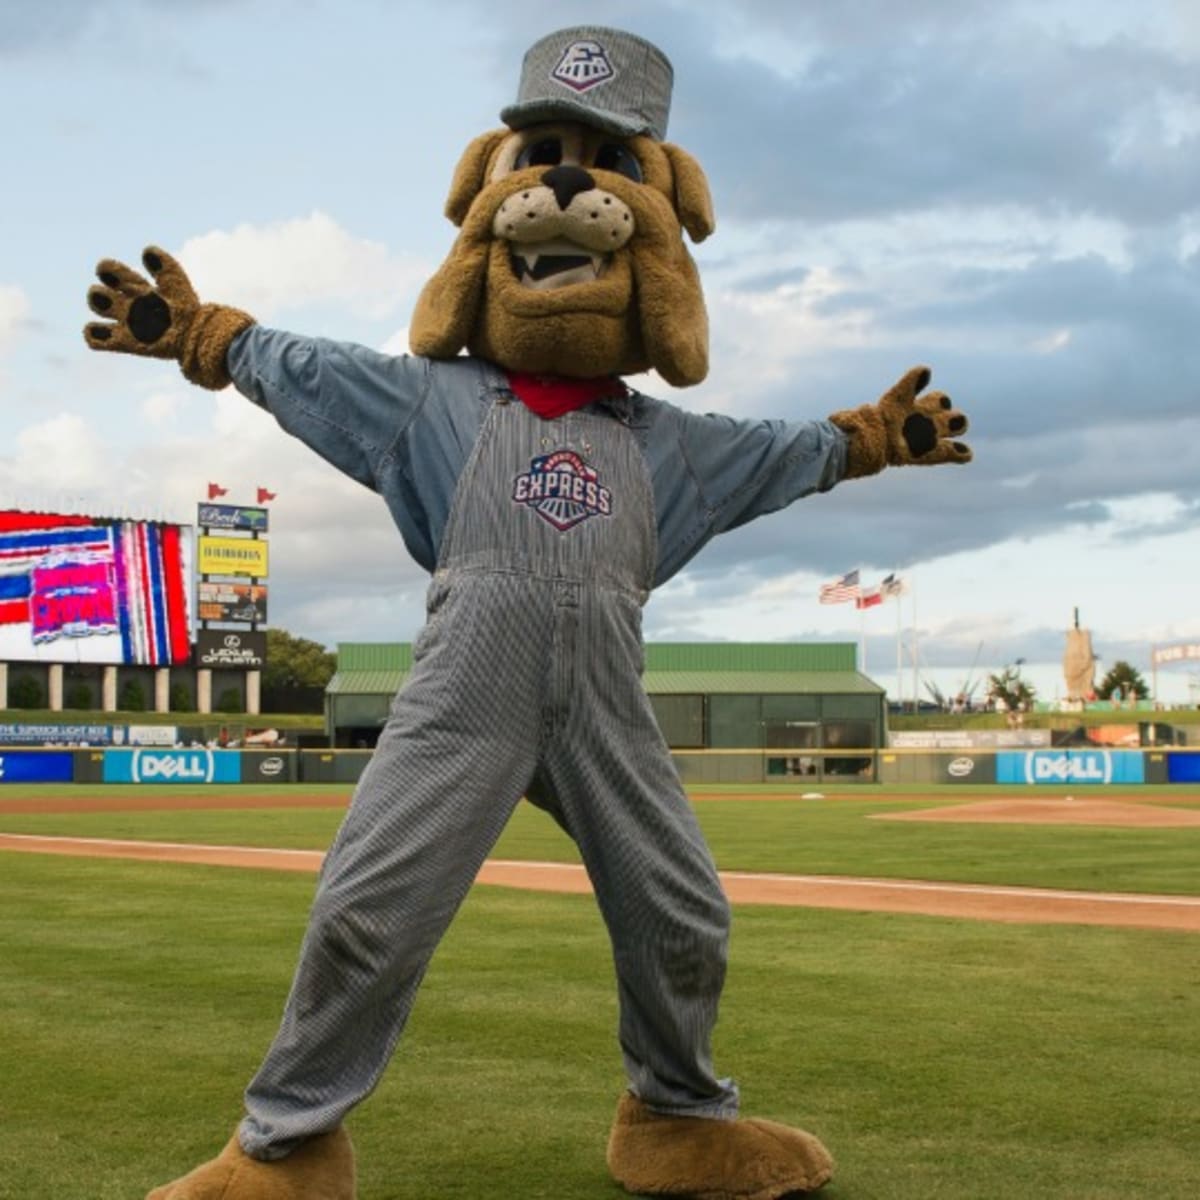 A Ranking of the Upper Midwest's Minor League Baseball Teams